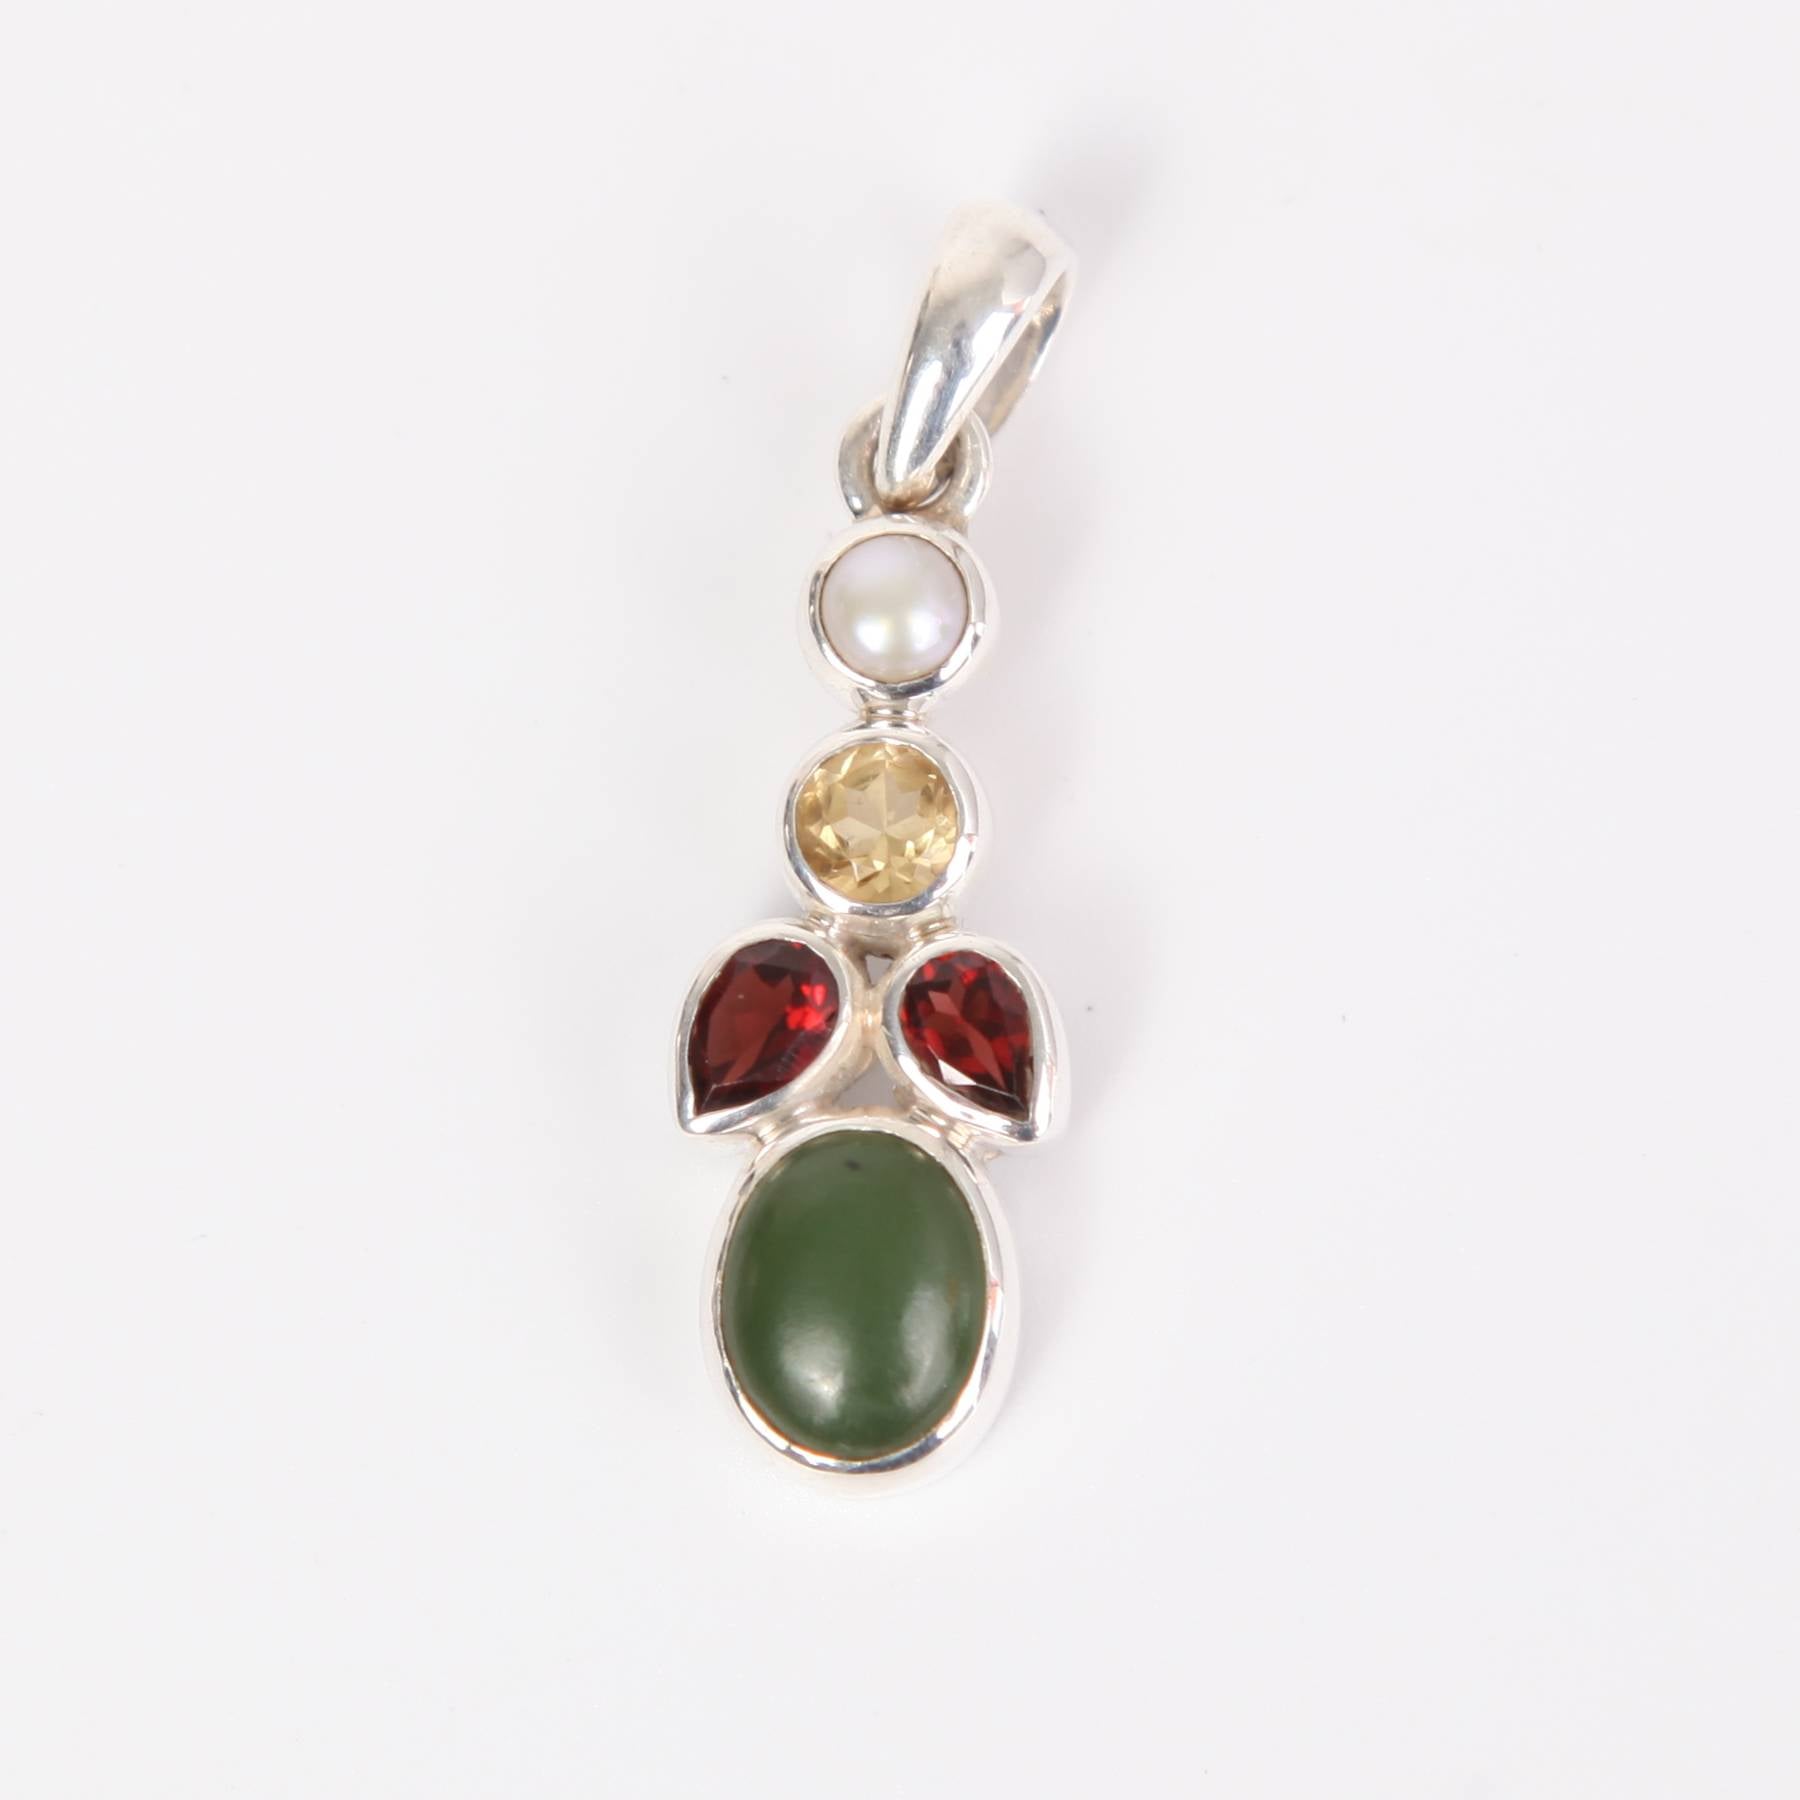 Nephrite Sterling Silver Pendant with Garnet, Citrine and Fresh Water Pearl